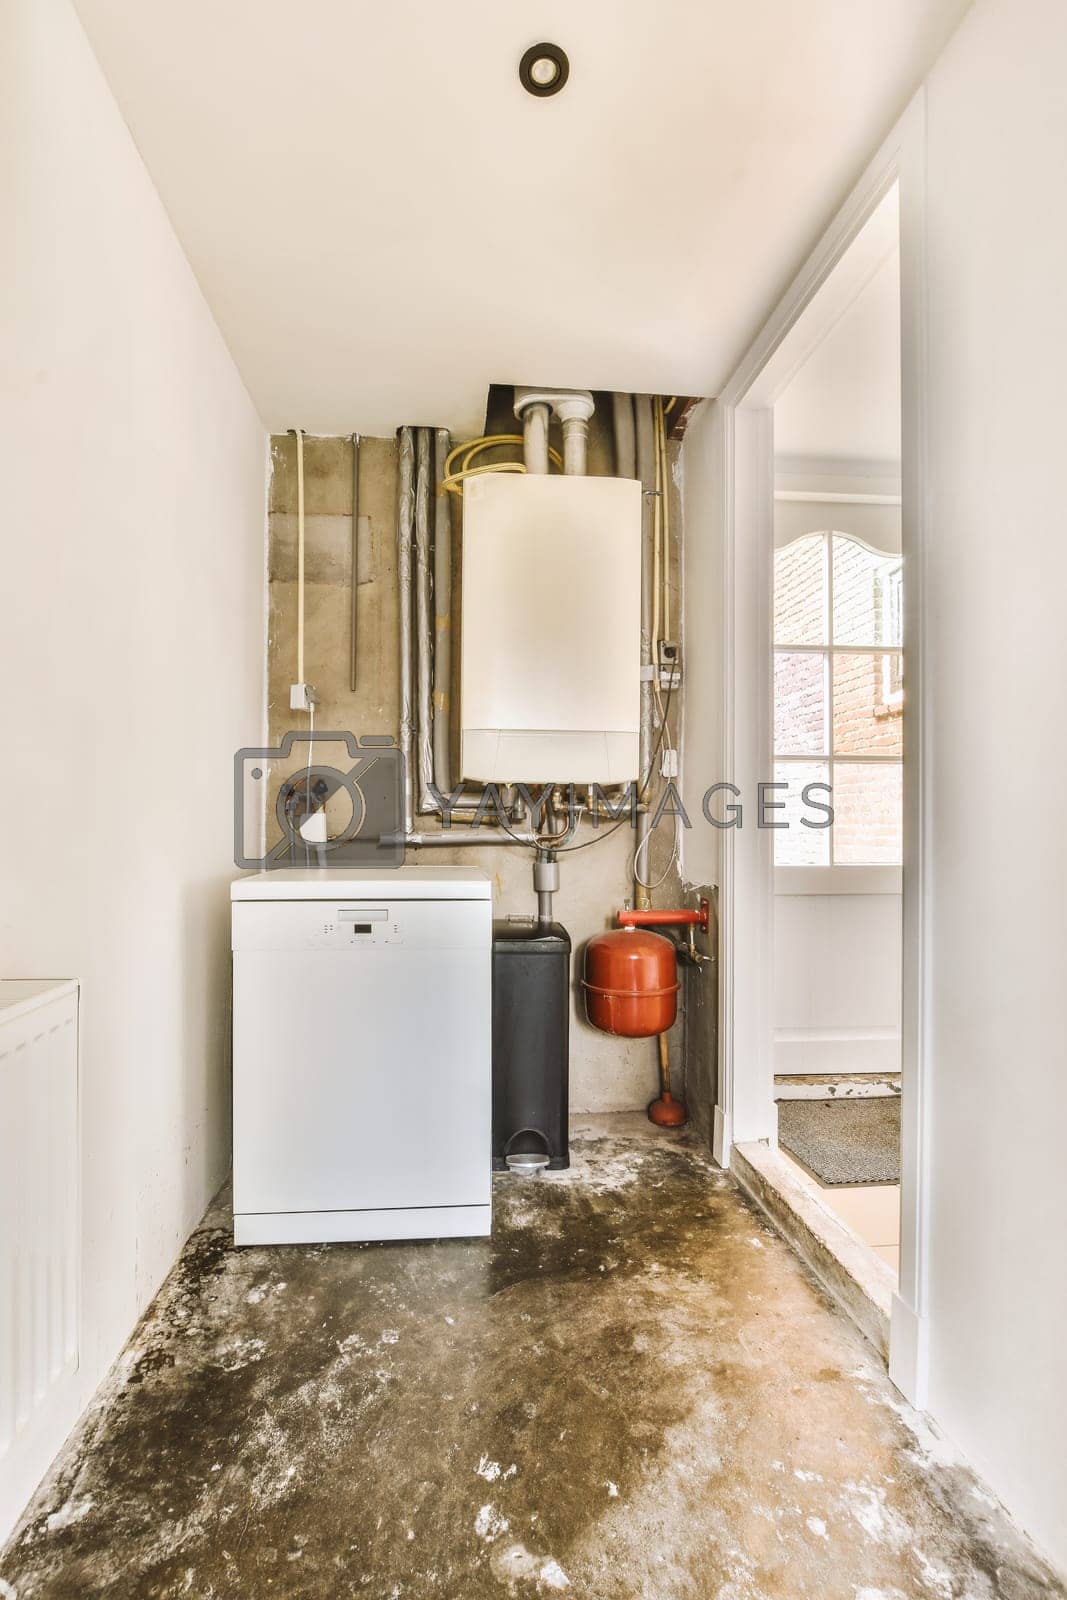 Royalty free image of a small kitchen with a white refrigerator and exposed pipes by casamedia